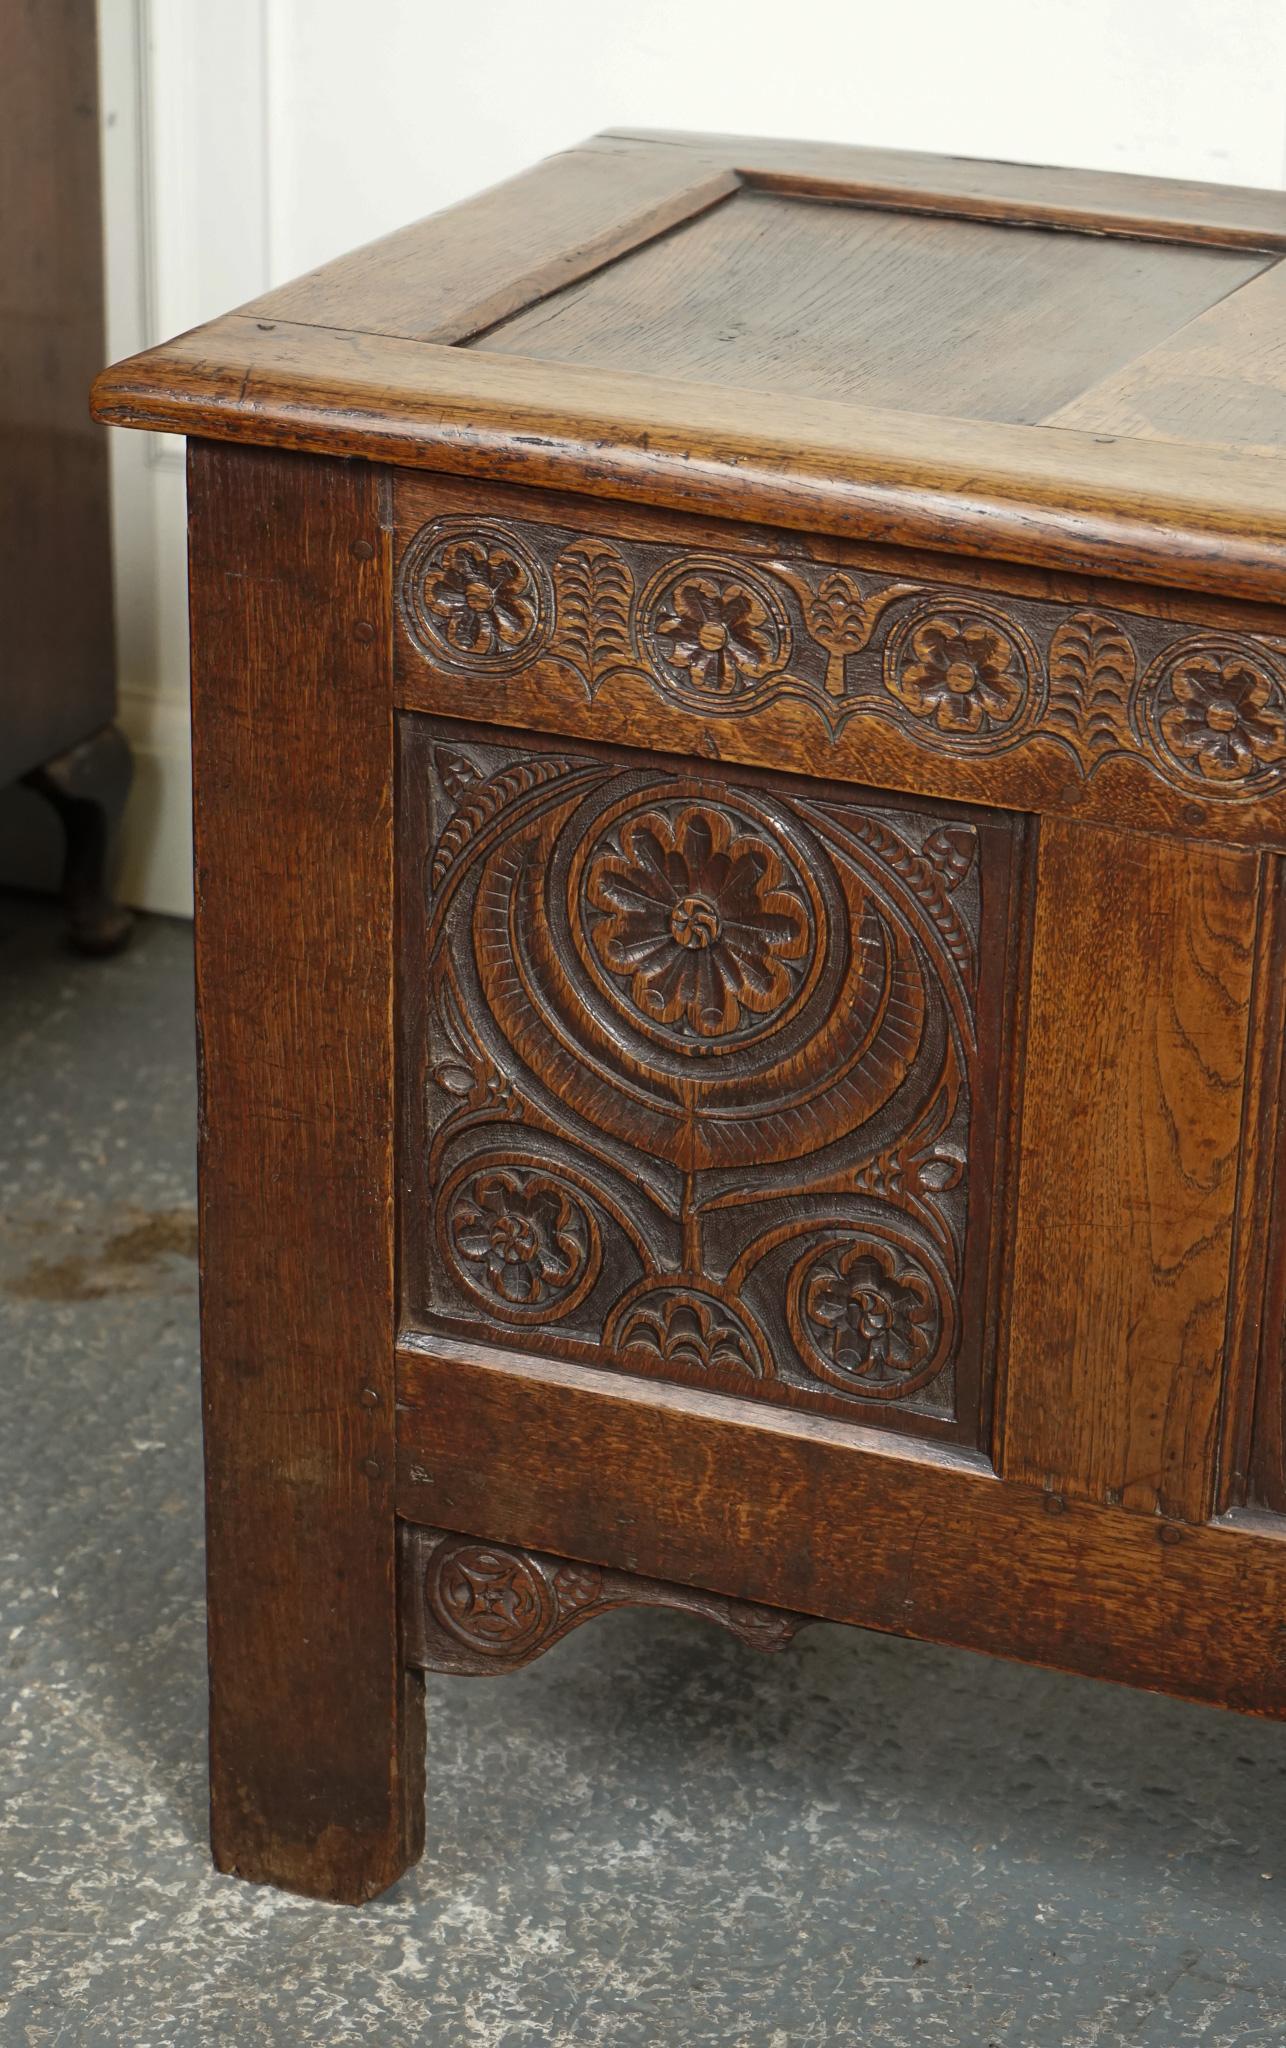 LOVELY 17TH CENTURY CARVED ANTIQUE OAK TRUNK CHEST COFFER j1 For Sale 3